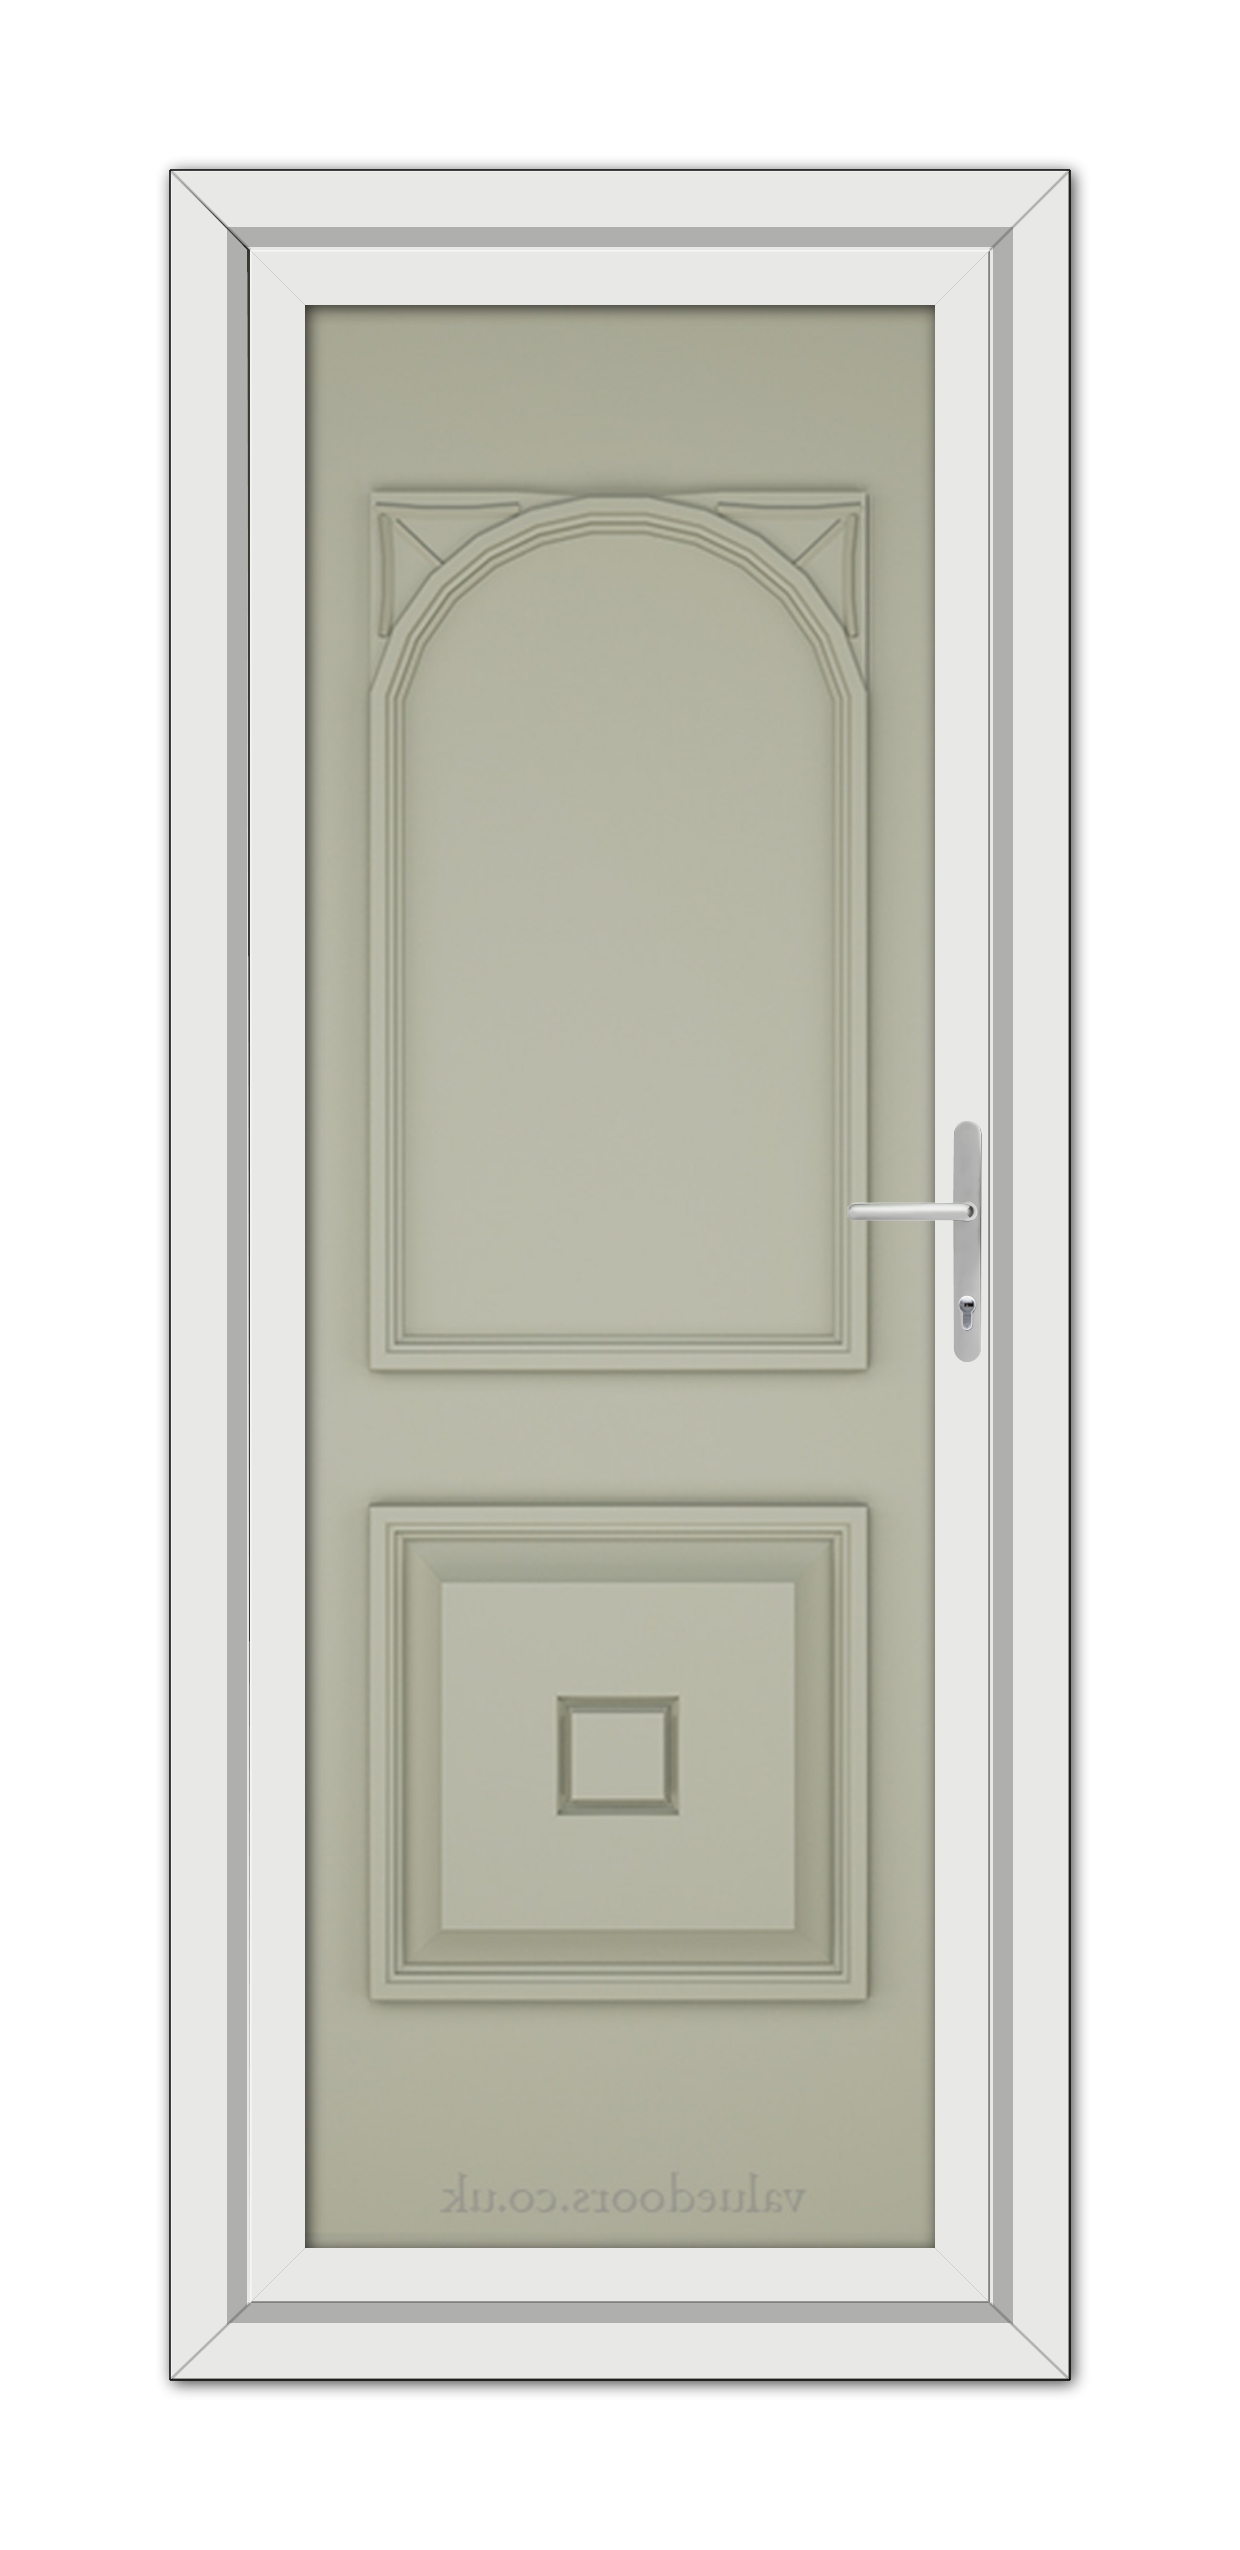 A vertical image of a Agate Grey Reims Solid uPVC Door with an arched upper panel, a square bottom panel, and a modern handle, set within a white frame.